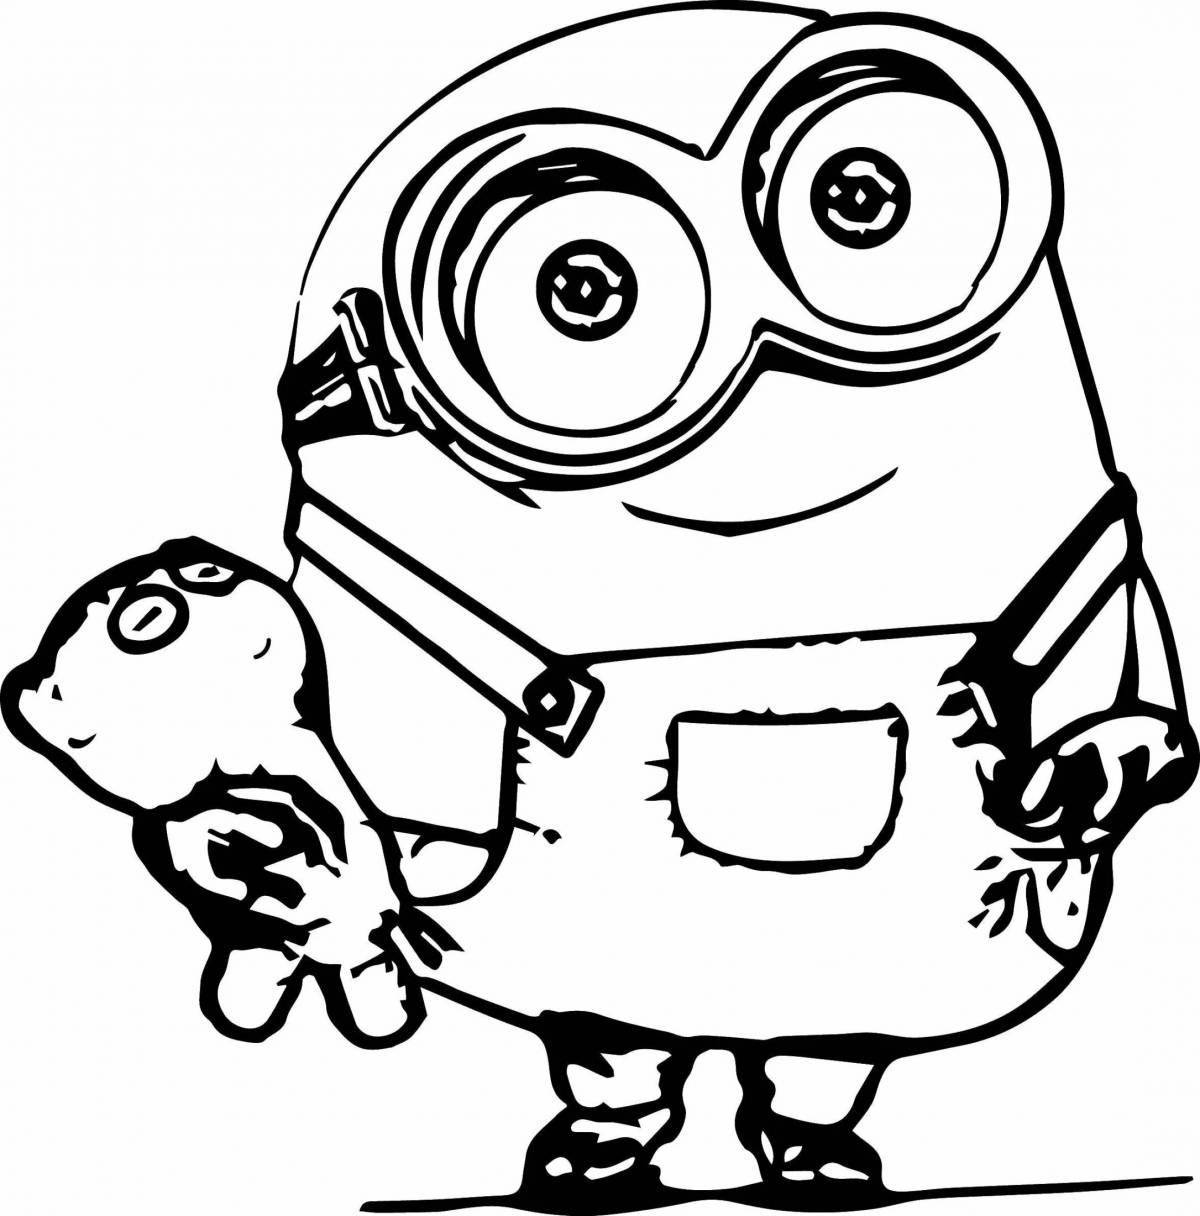 Adorable minion coloring pages